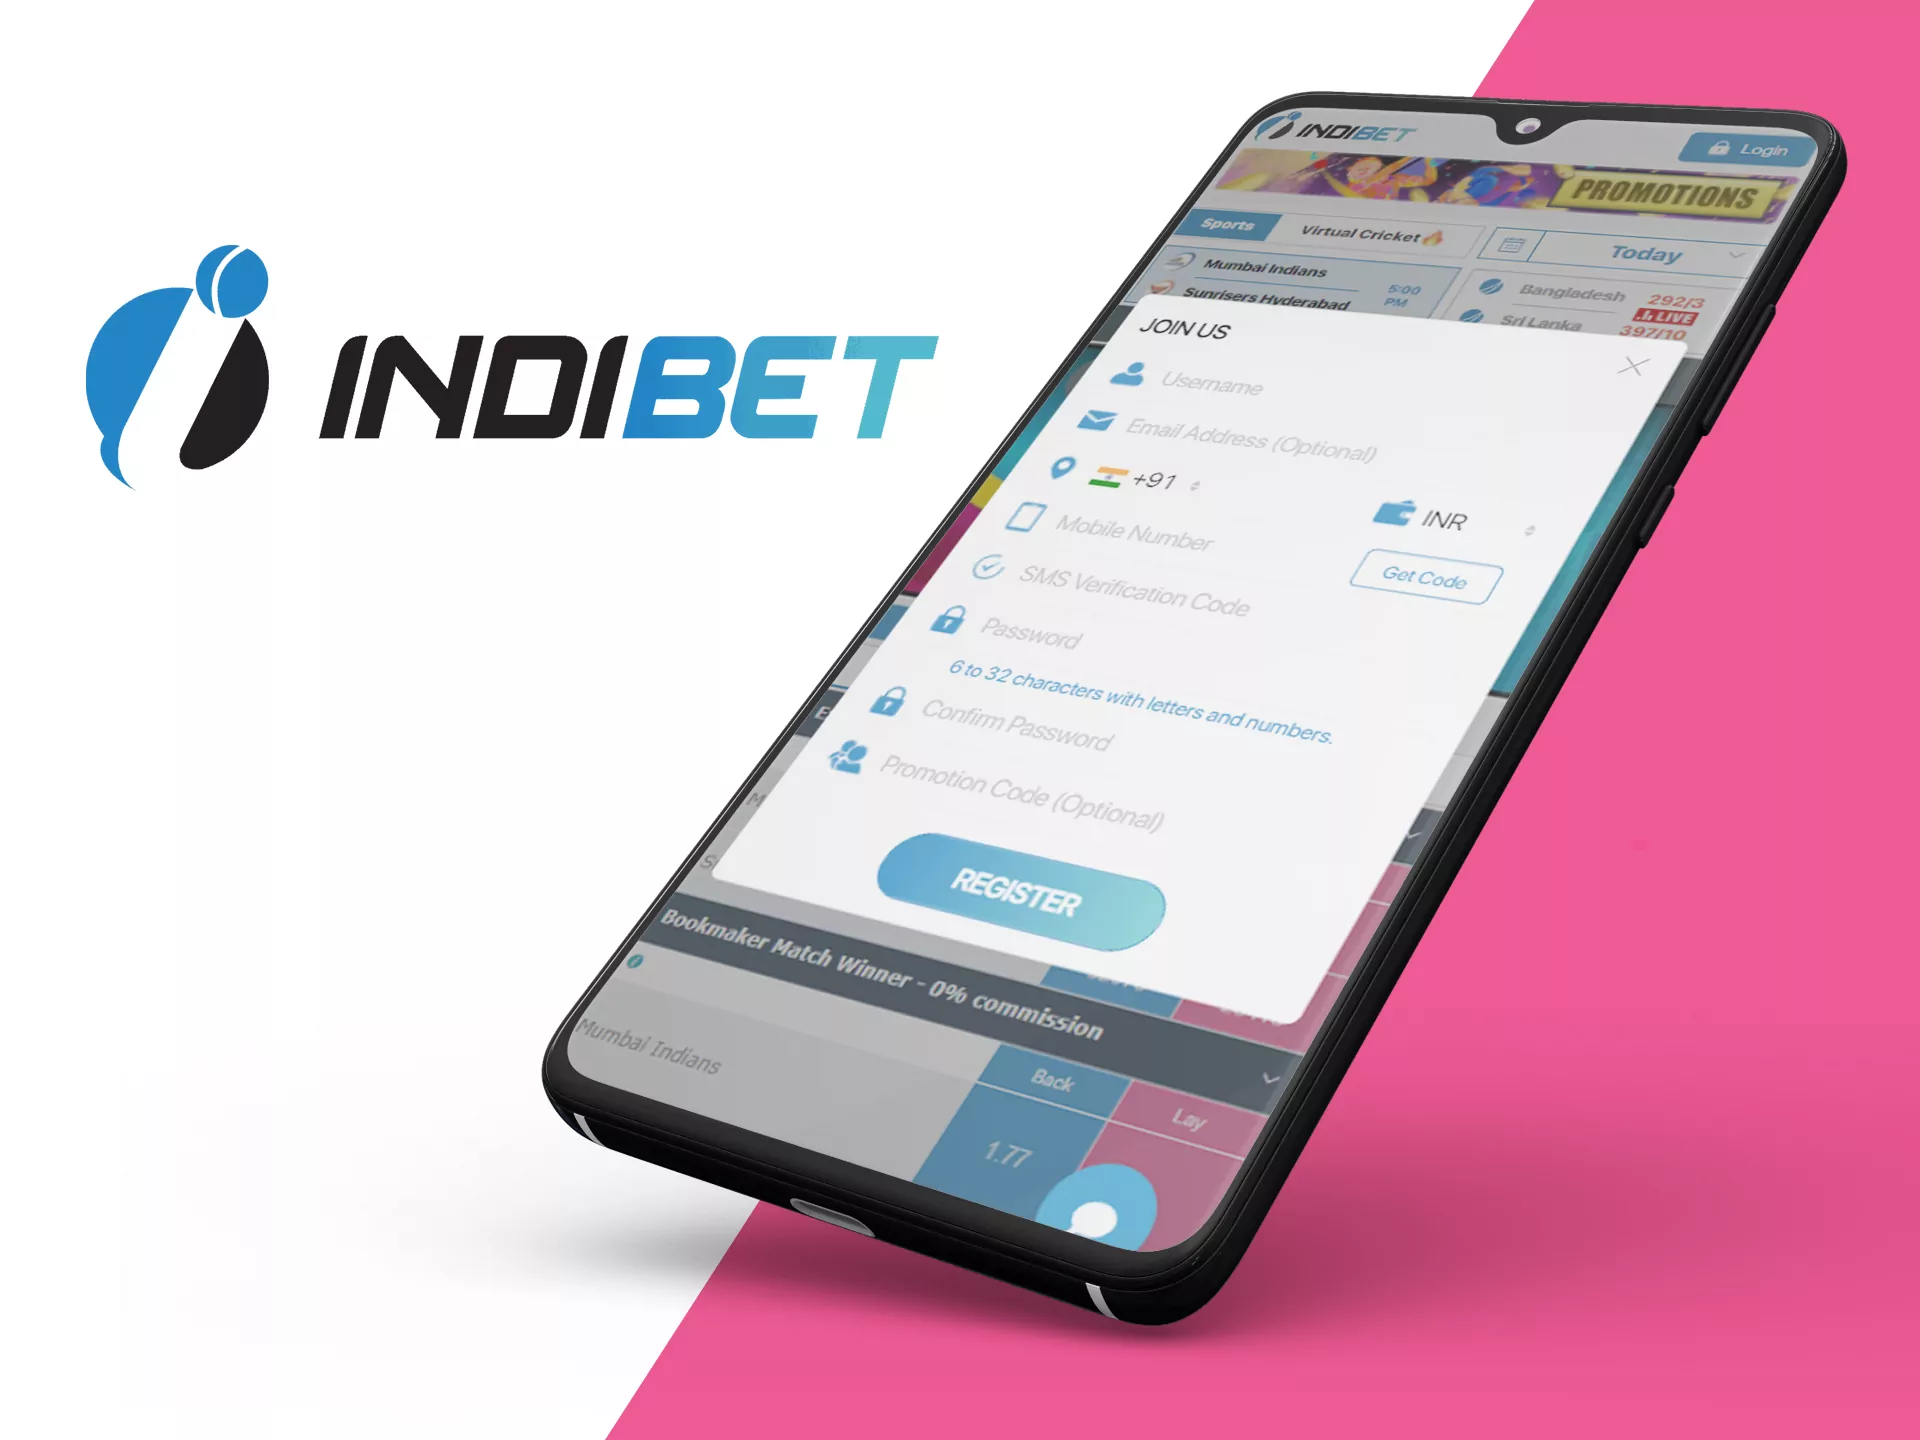 Use your data to log in on the website or Indibet App, you don't need to create 2 accounts.